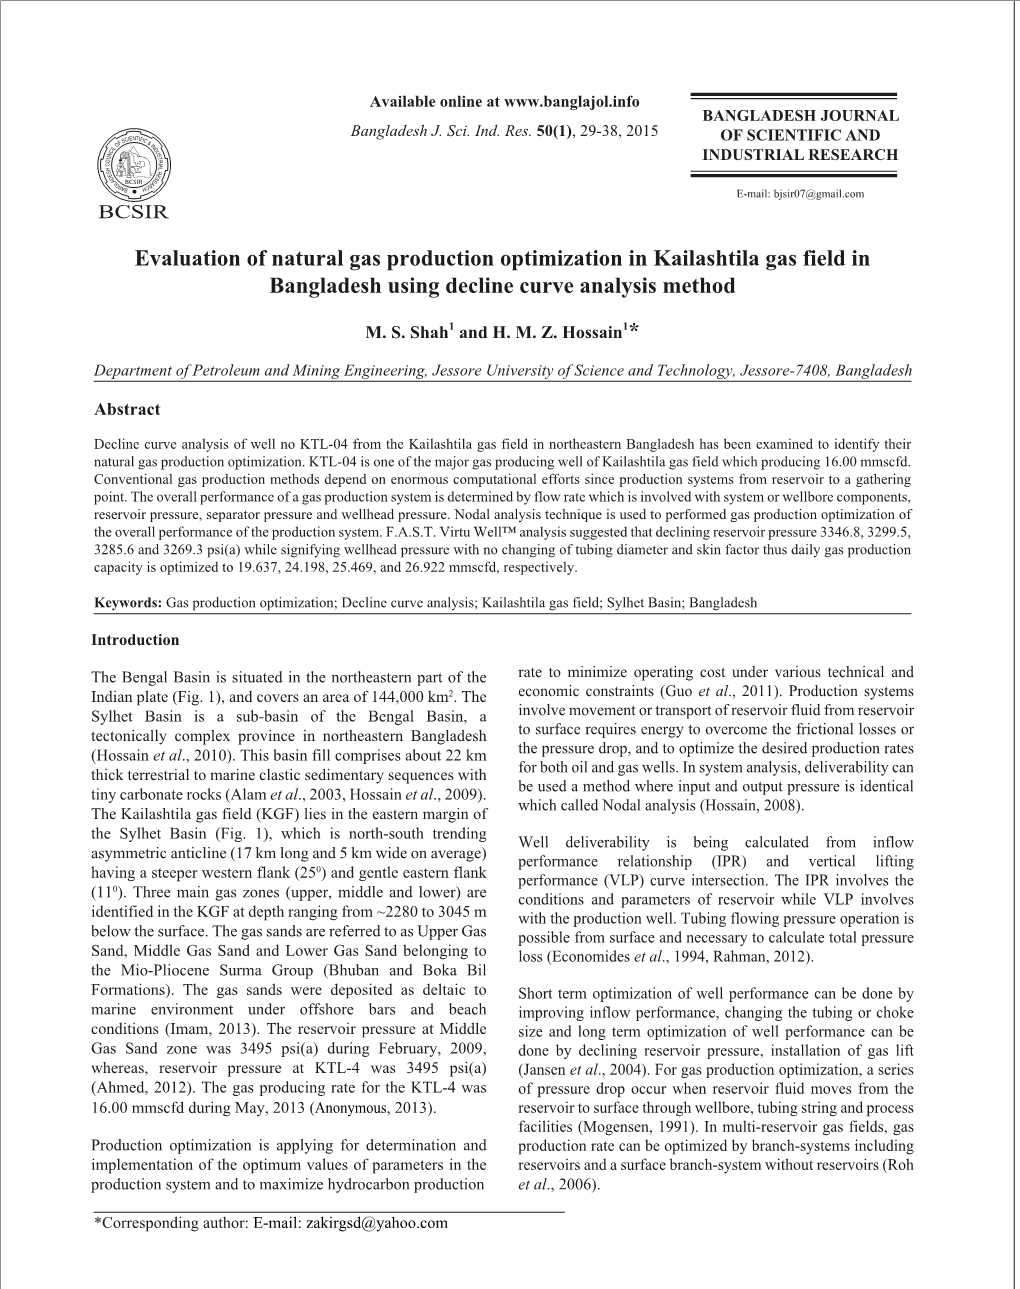 Evaluation of Natural Gas Production Optimization in Kailashtila Gas Field